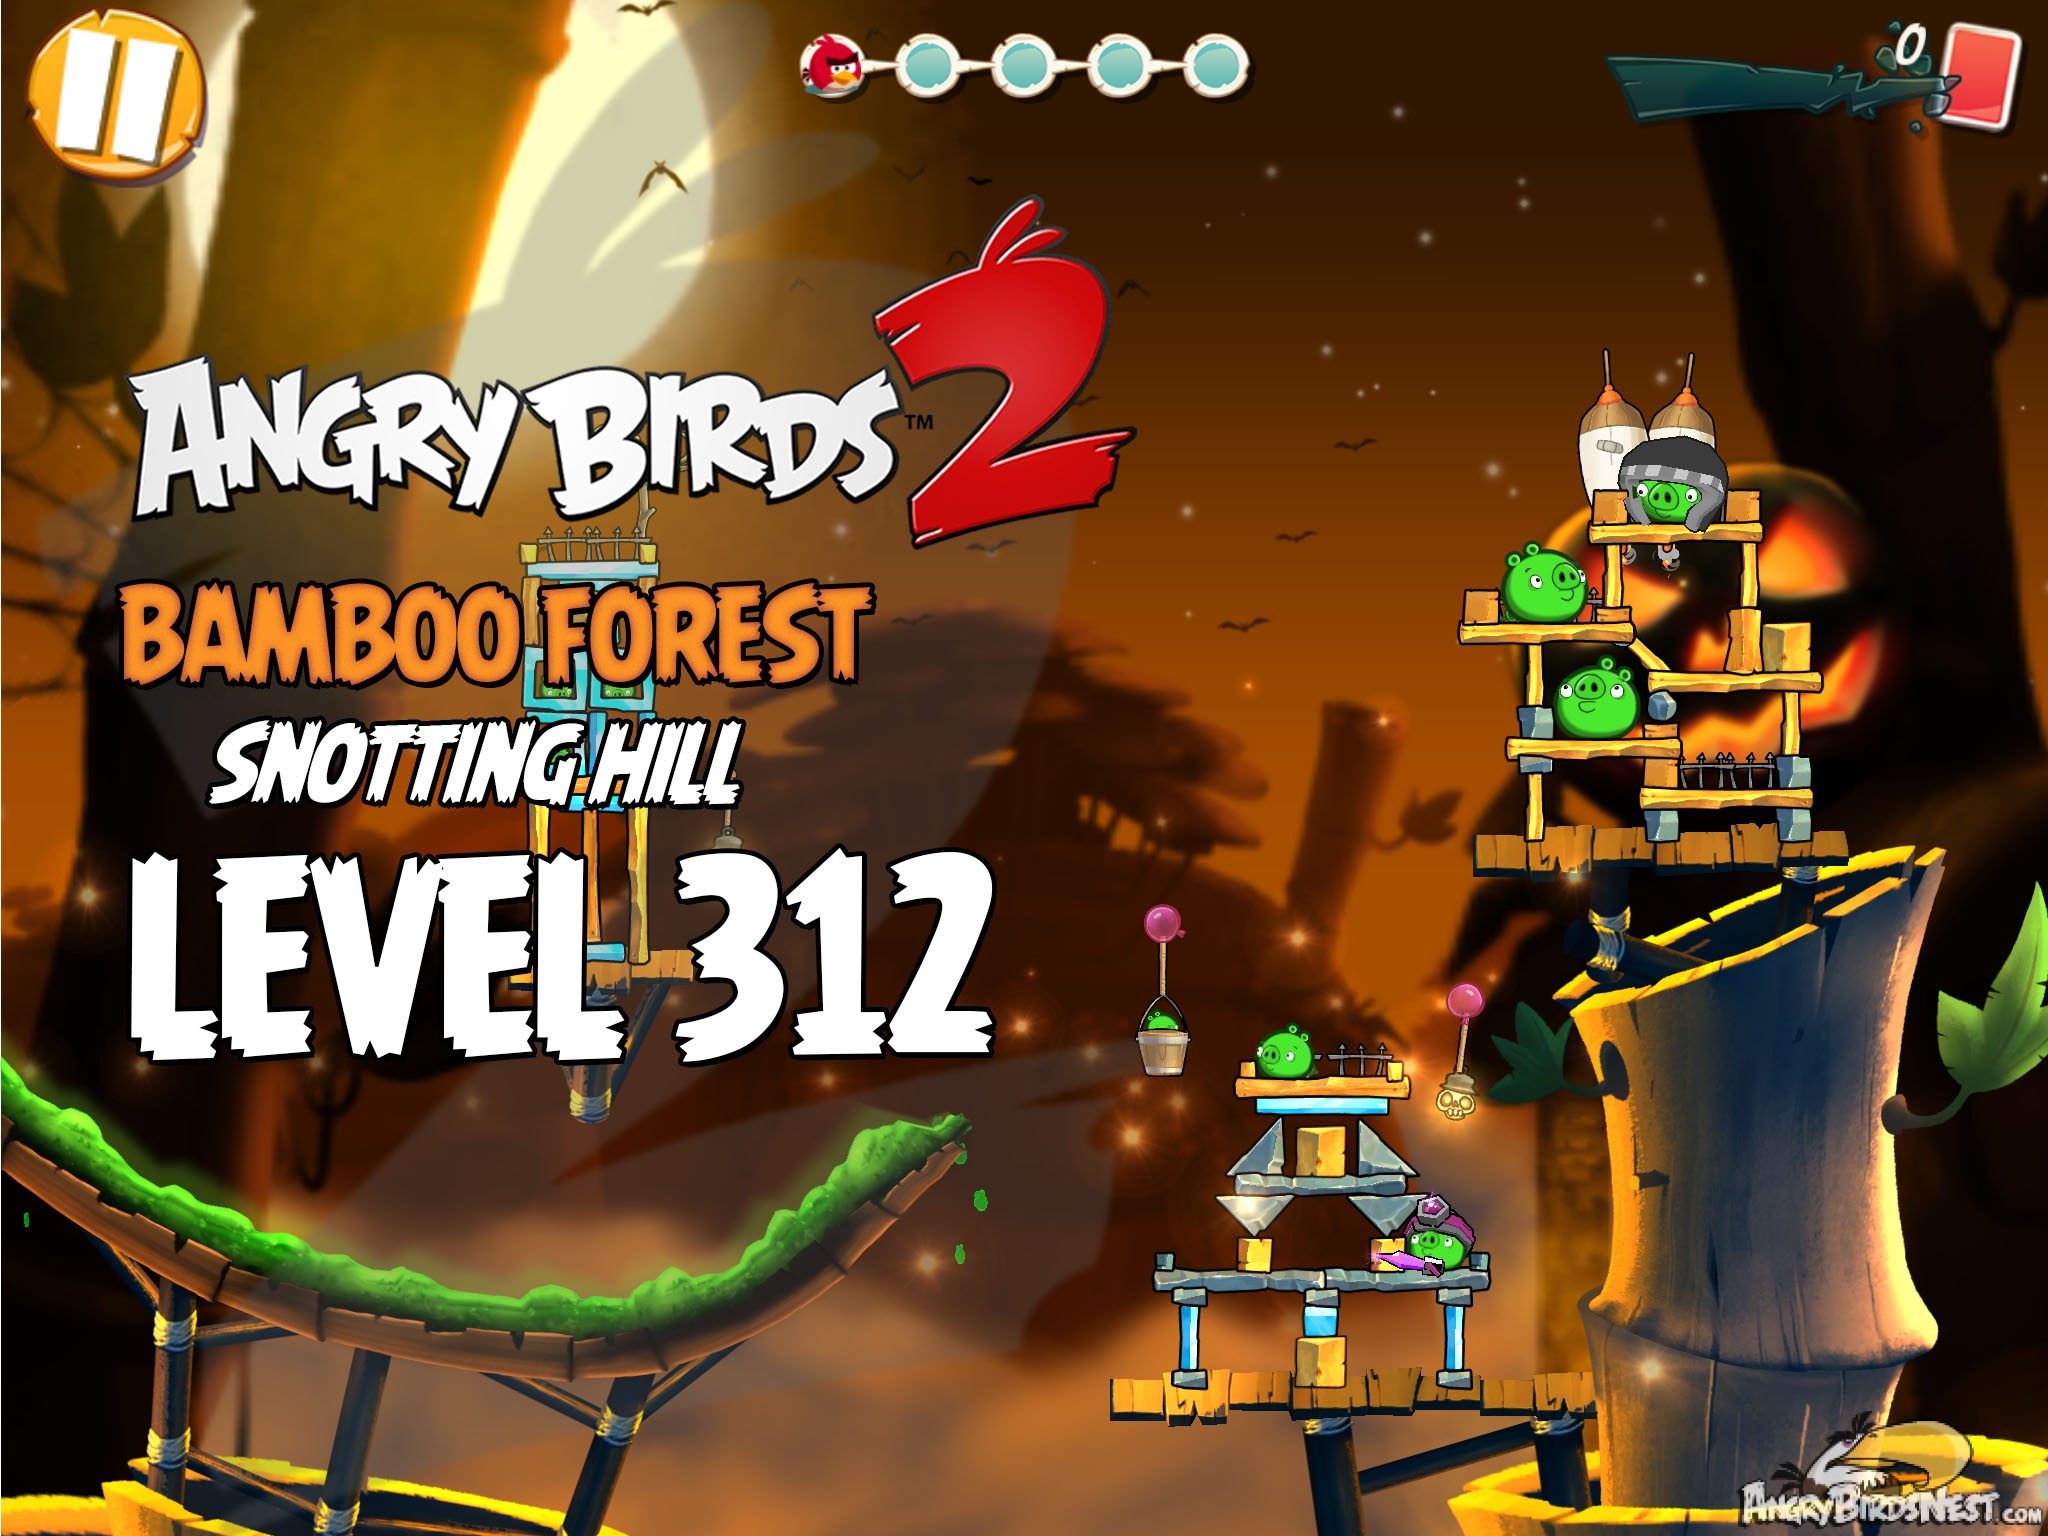 Angry Birds 2 Bamboo Forest Snotting Hill Level 312